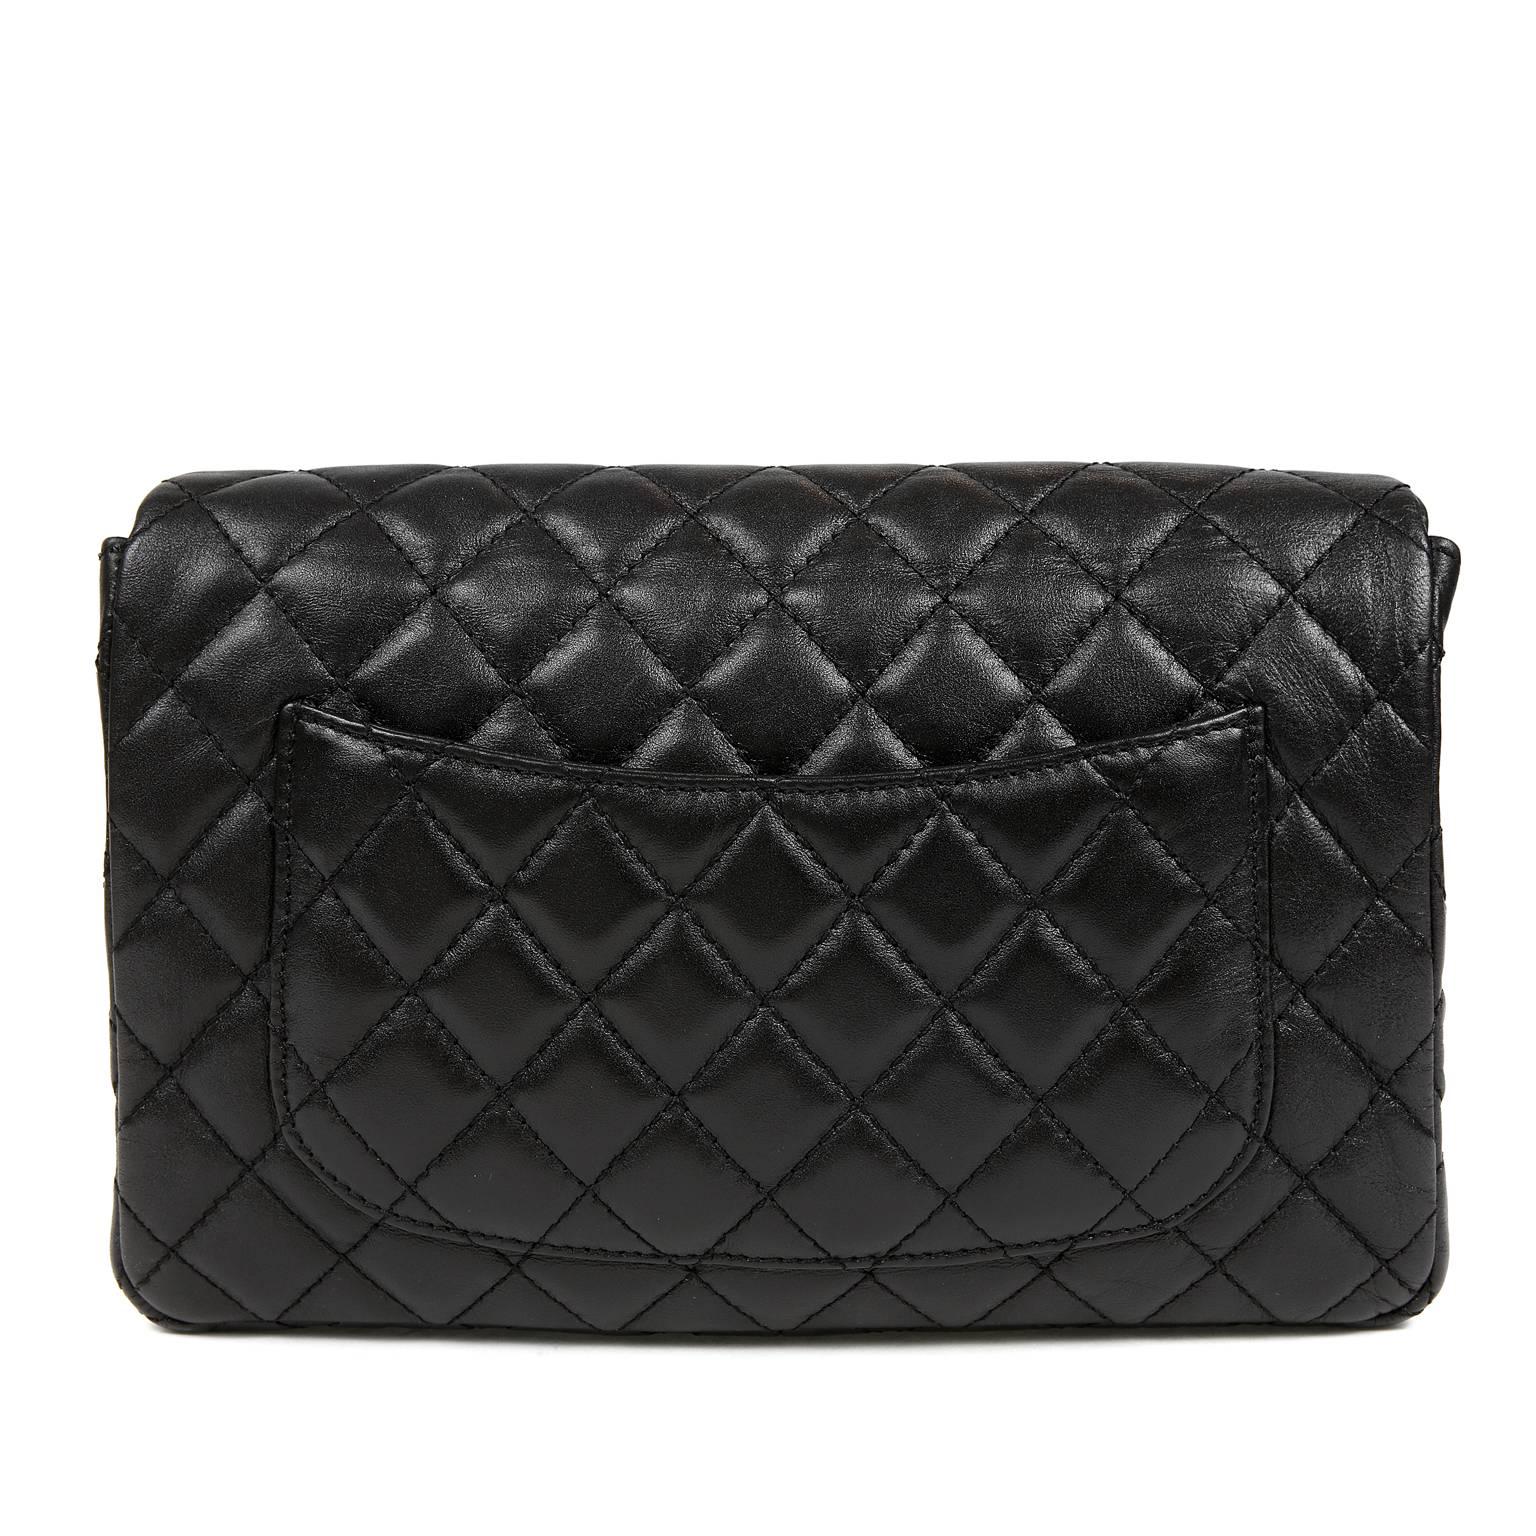 Chanel Black Quilted Leather Flap Bag- EXCELLENT PLUS Condition
 Elegant and timeless, this medium sized shoulder bag is a smart addition for any polished wardrobe. 

Black leather is quilted in signature Chanel diamond pattern.  Matte gold